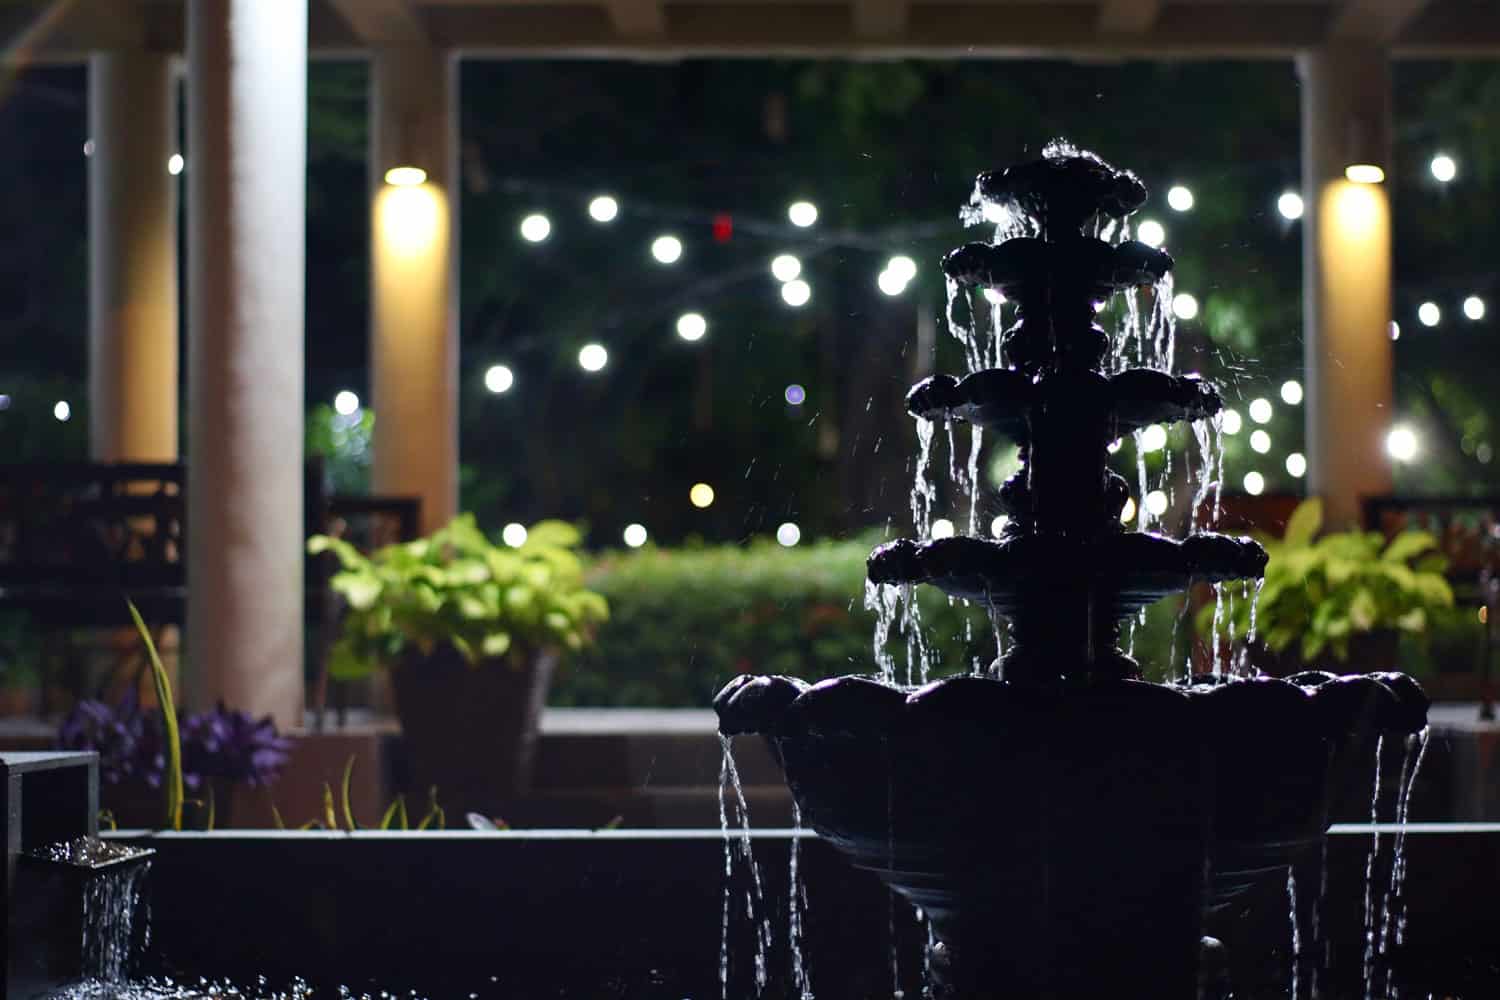 Water fountain at night